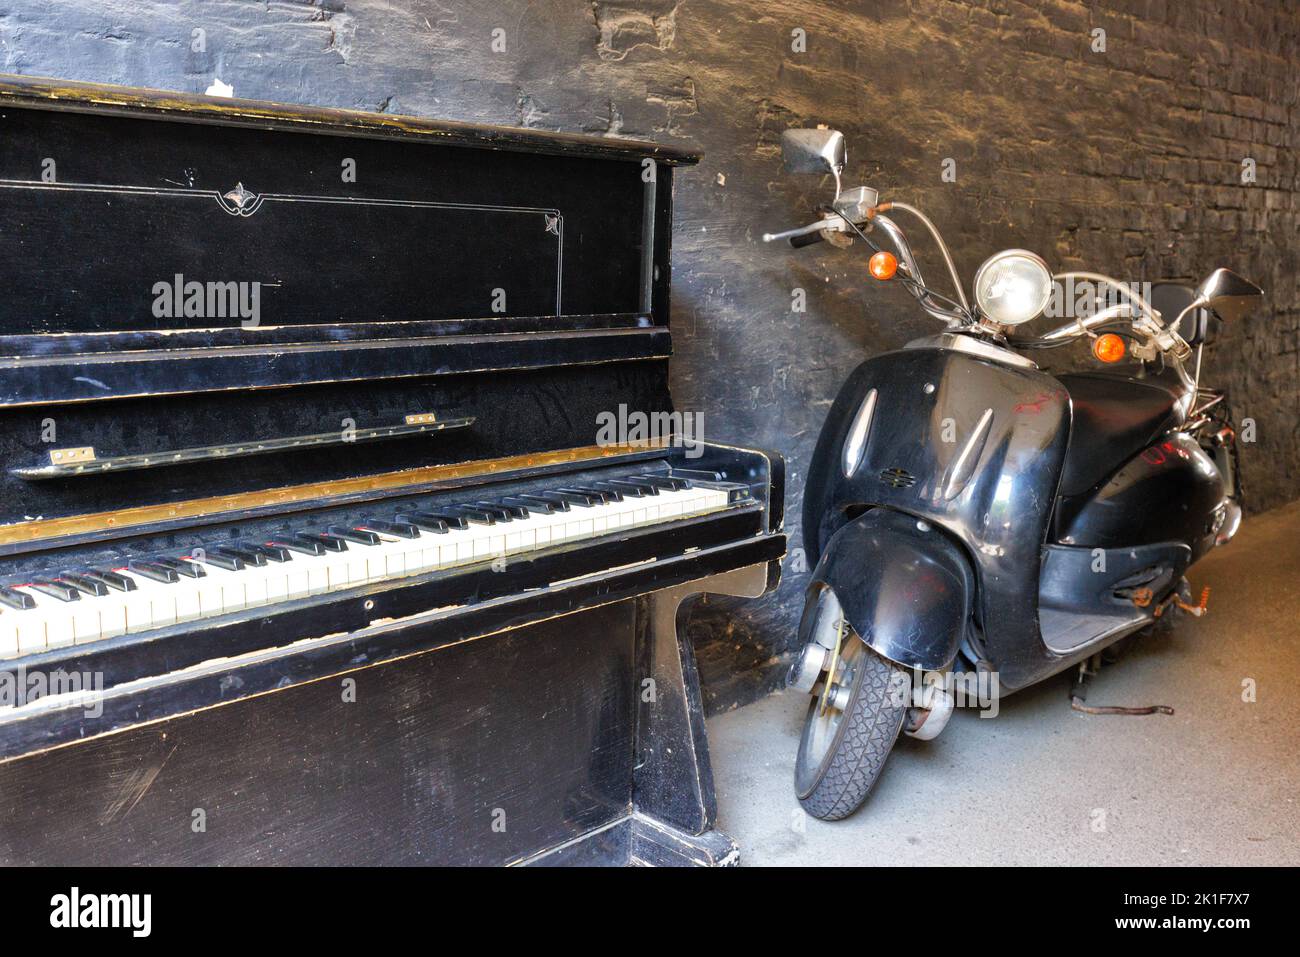 A retro piano near a vintage motorcycle against the background of an old brick wall painted with black paint. Stock Photo